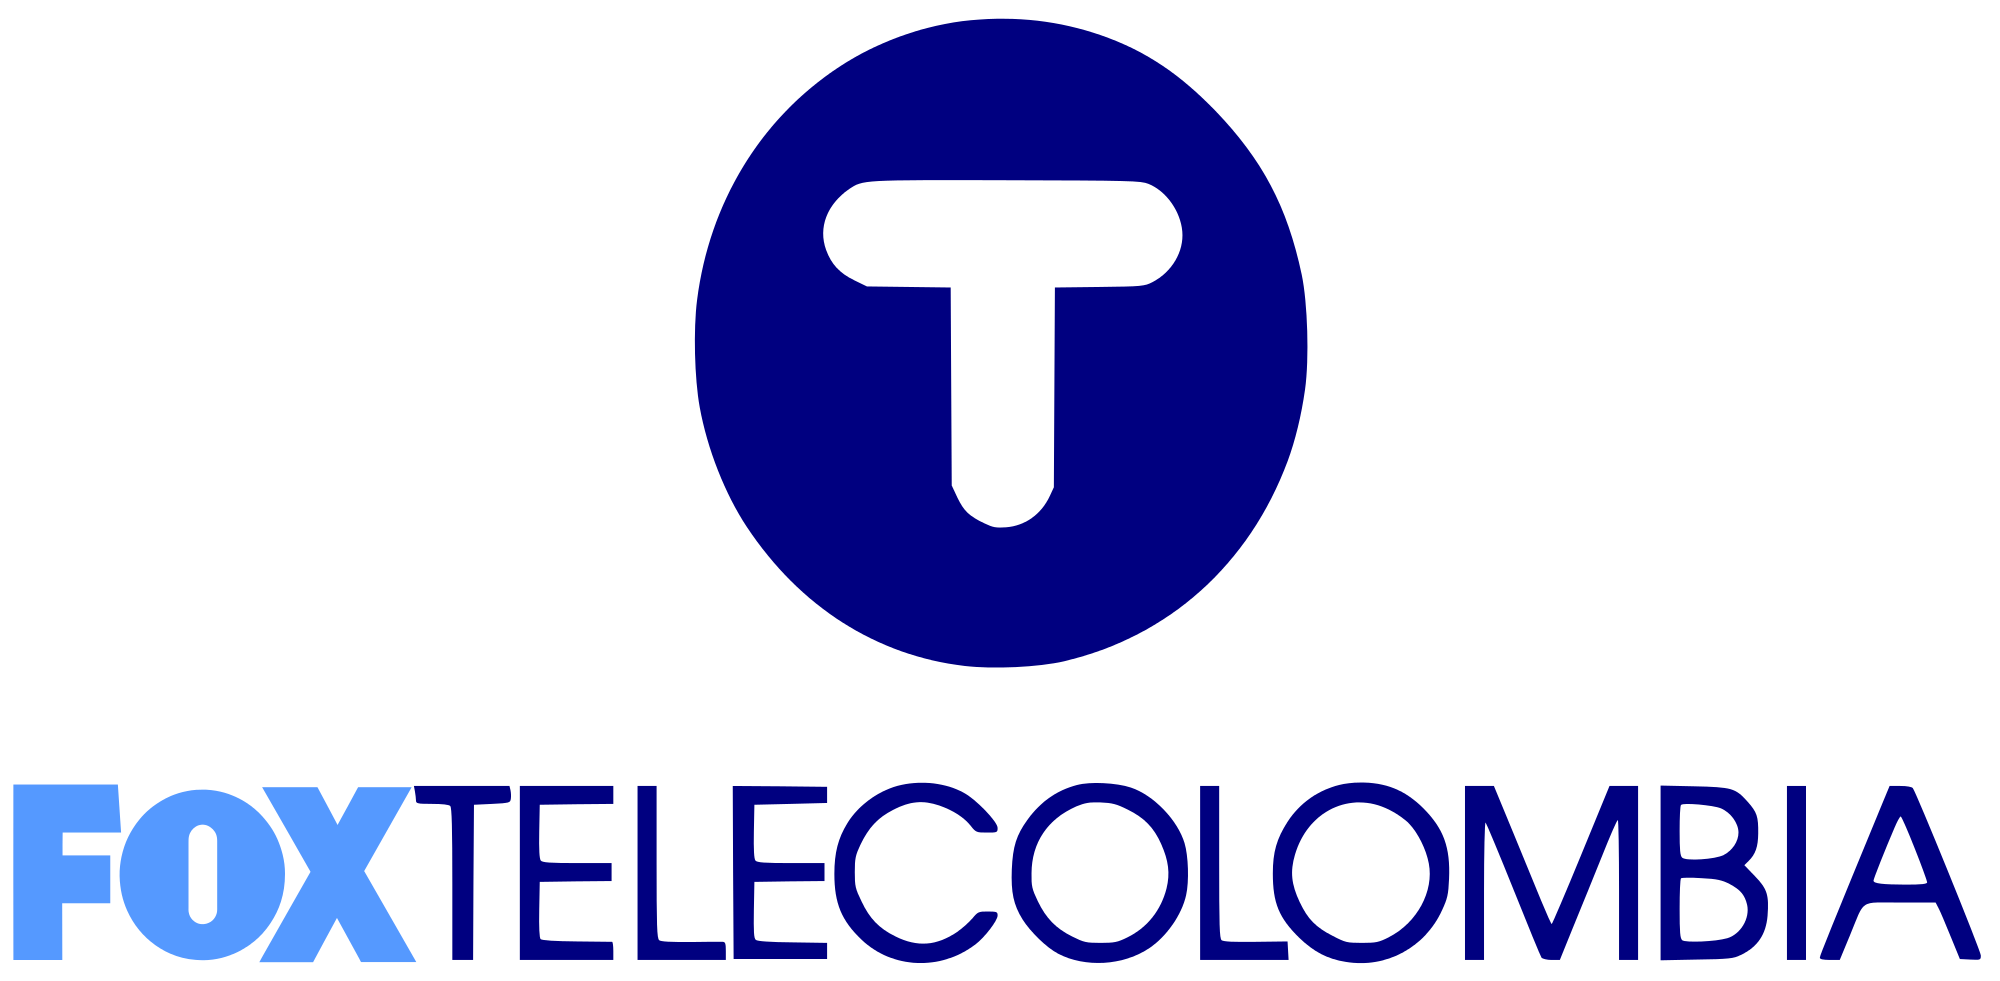 Fox_Telecolombia_logo.svg.png